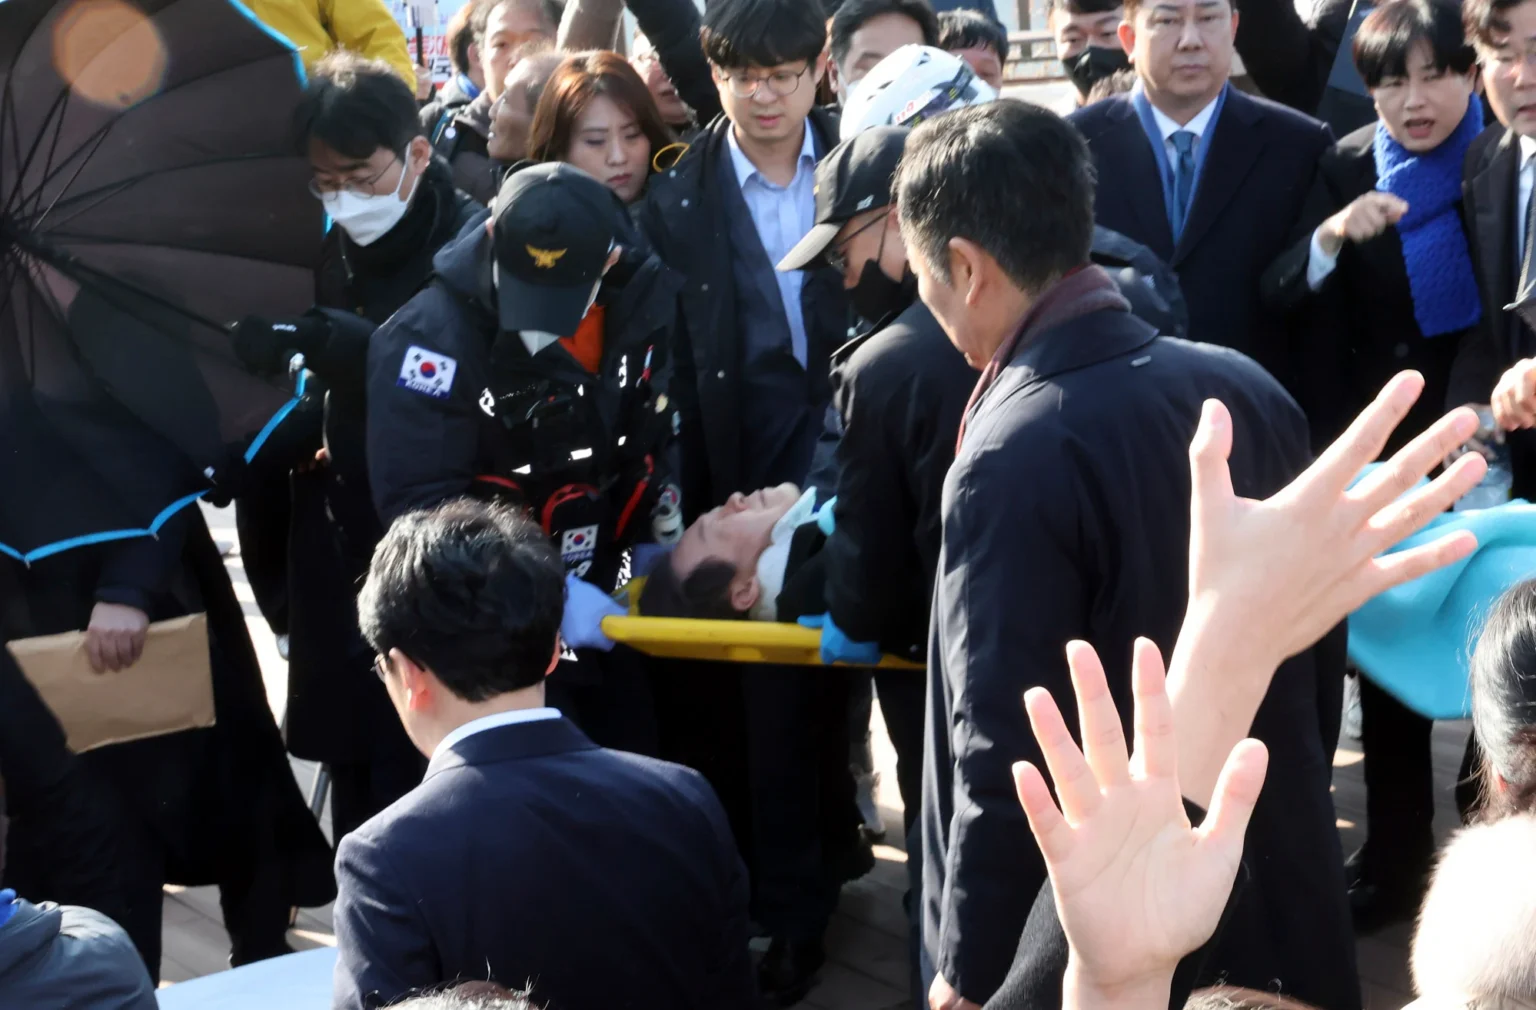 south-korean-opposition-leader-lee-jae-myung-could-have-been-killed-in-knife-attack-party